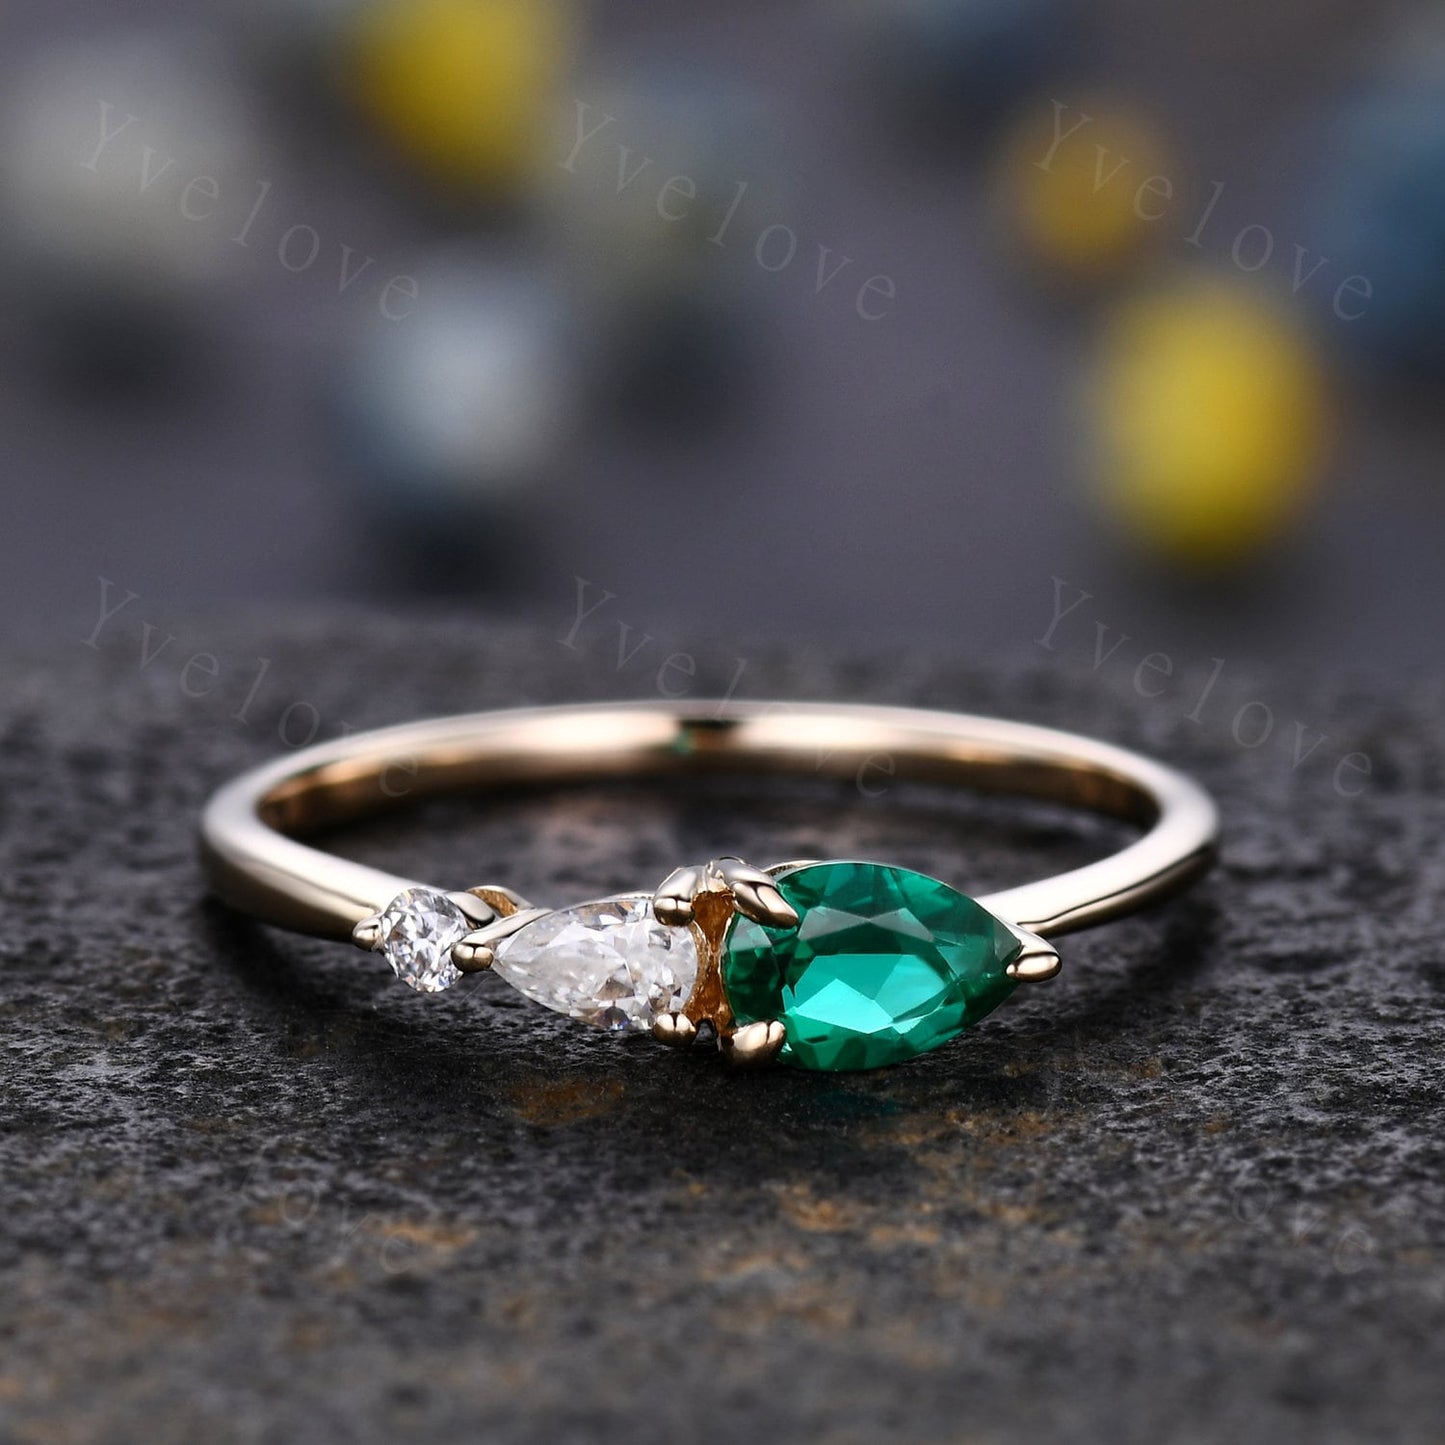 Vintage Emerald Ring Engagement Ring,Pear Cut Gems,Art Deco Moissanite Wedding Band,3 Stone Unique Women Bridal Promise Ring Gift,Rose gold